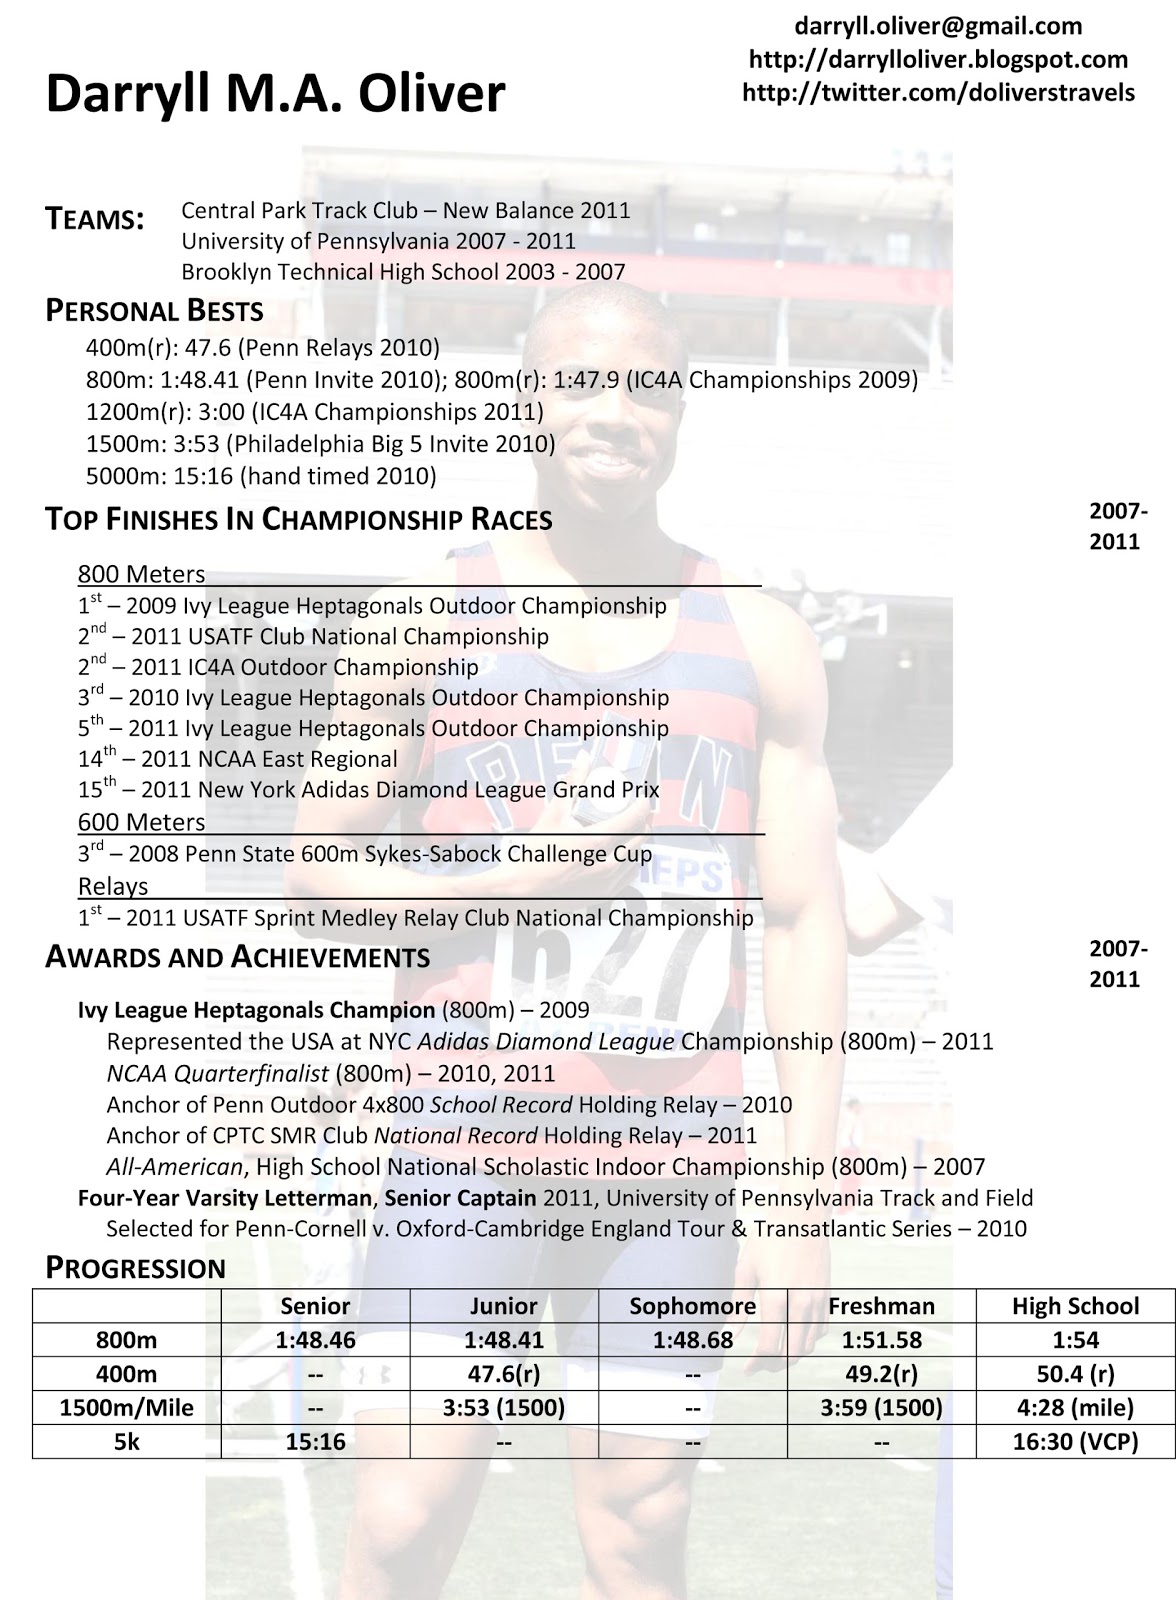 Athletic resume for college application